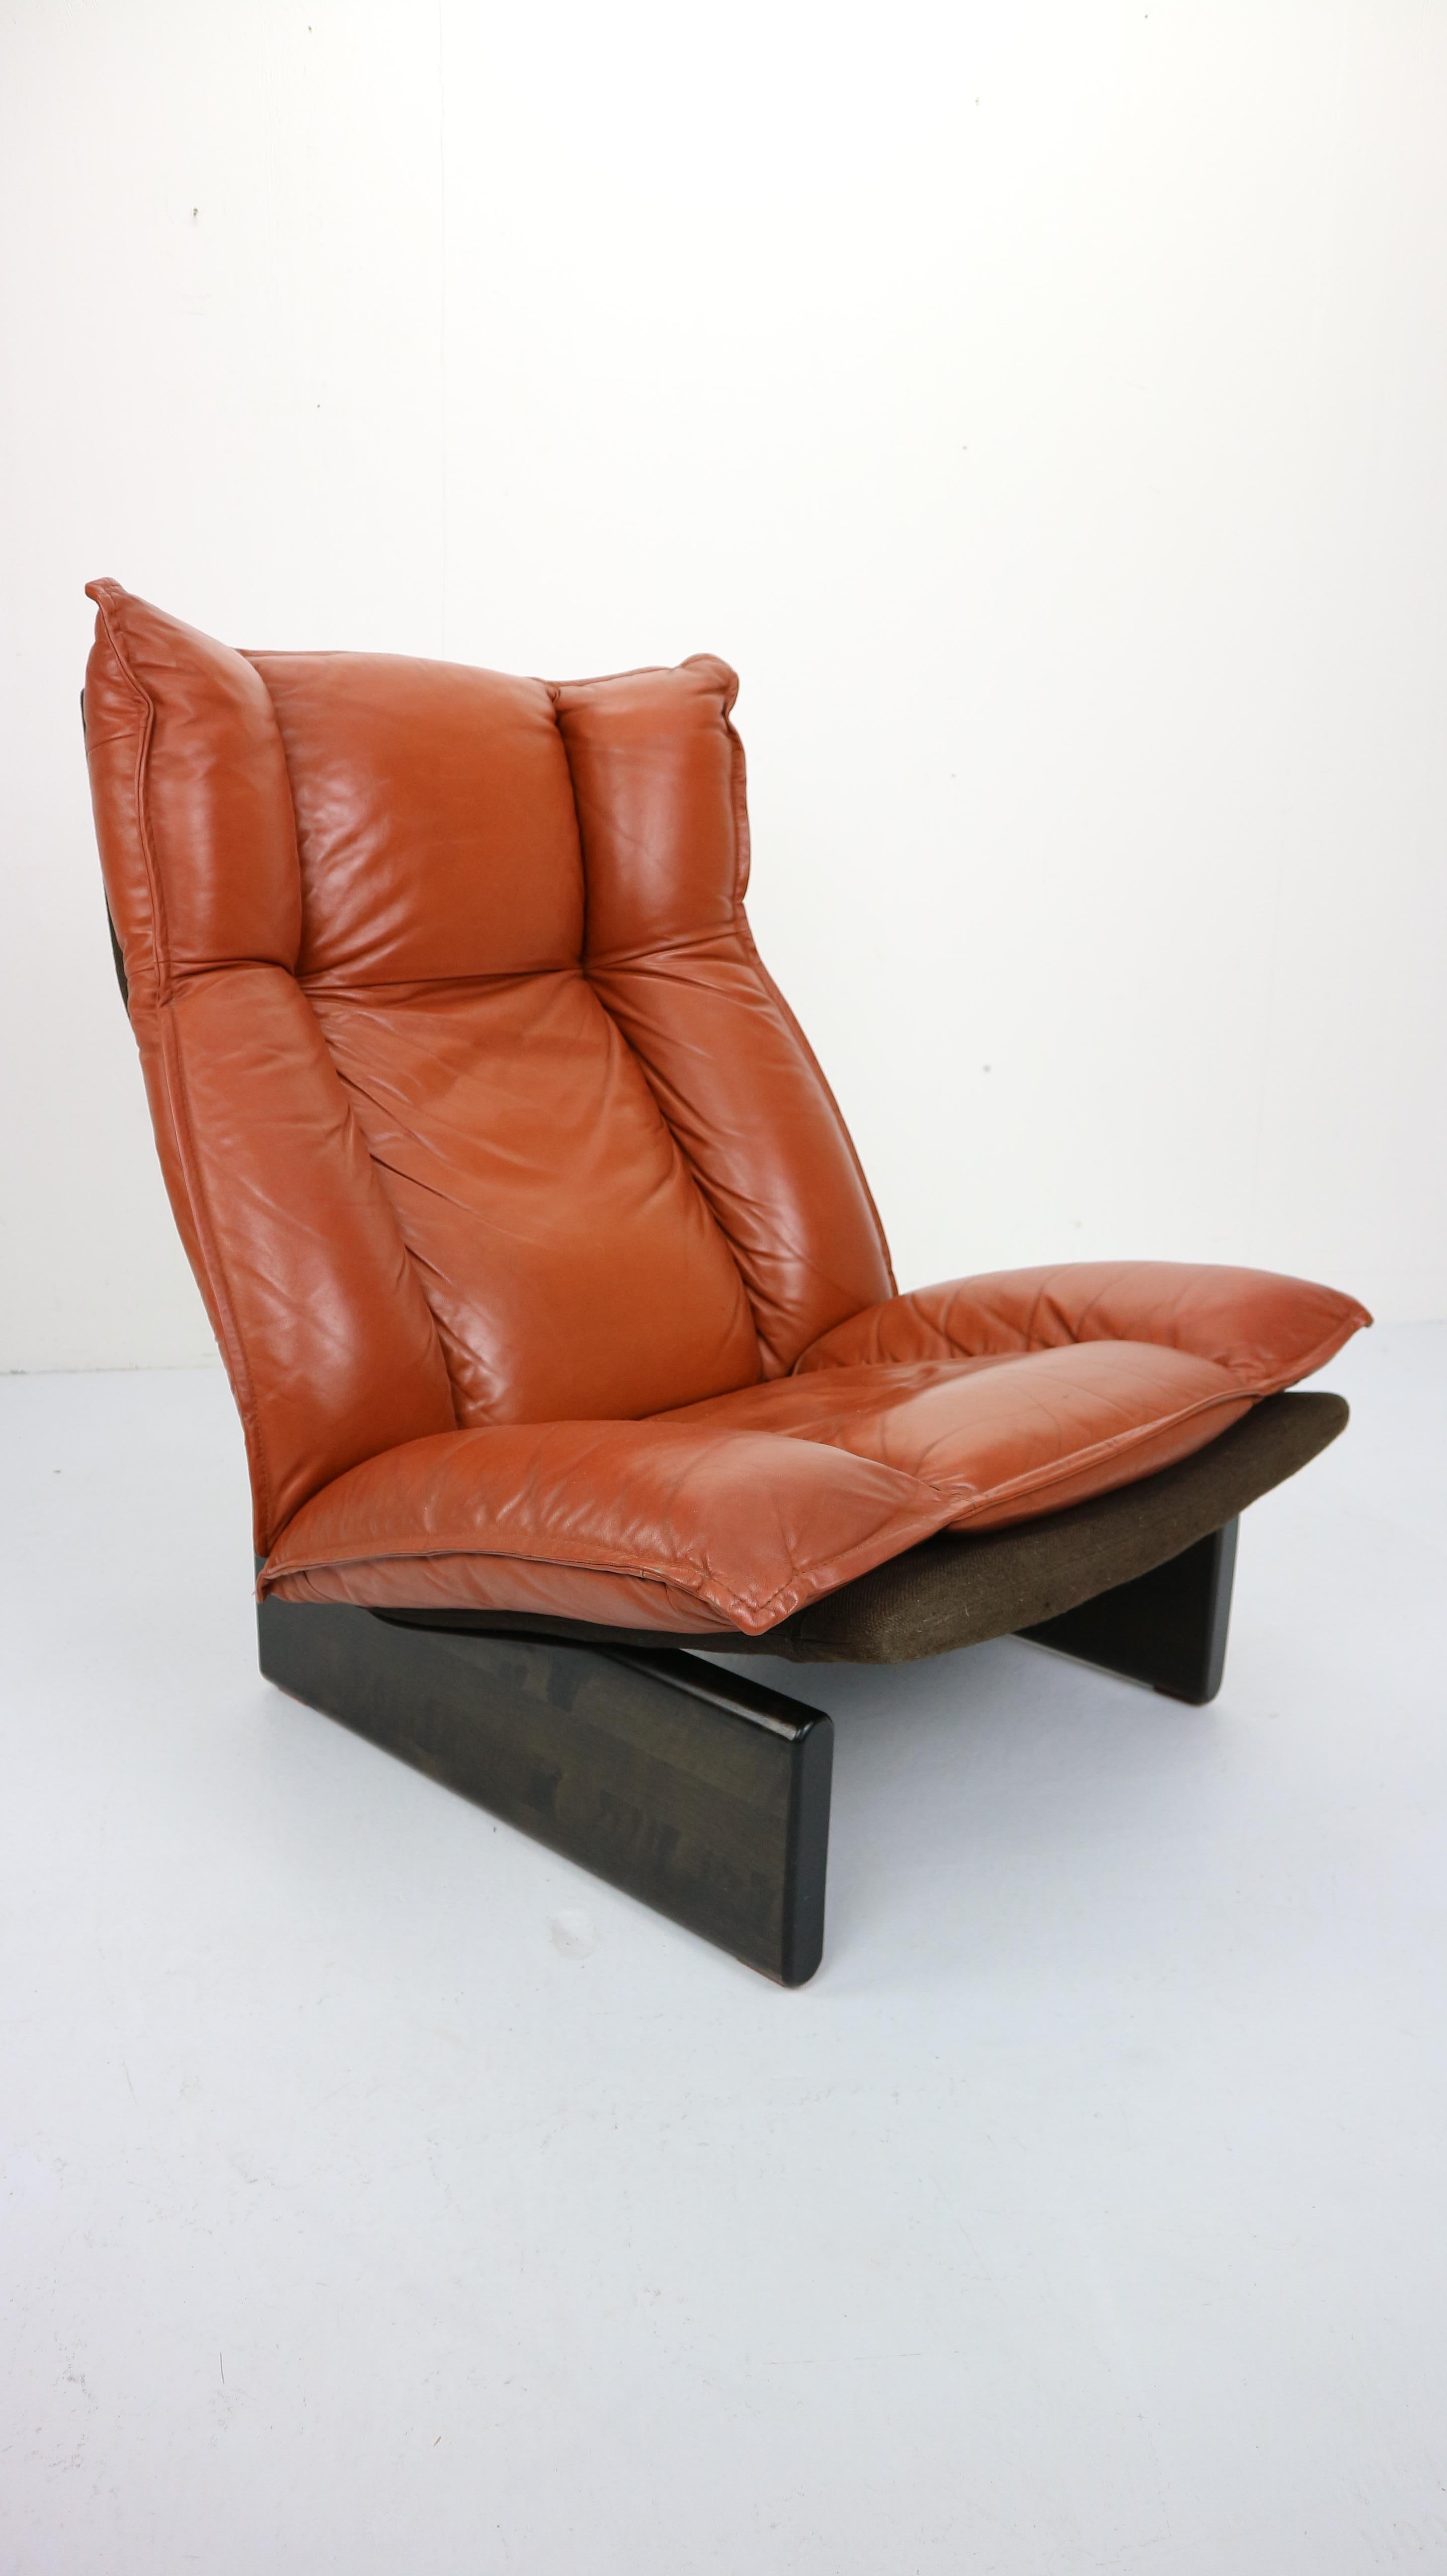 Cognac super comfortable lounge chair is an eyecatcher for your home.
Dutch modern design, 1970s.
The seating and back are made of one piece, upholstered with comfortable cognac leather cushions. This piece is resting on a solid wooden base.